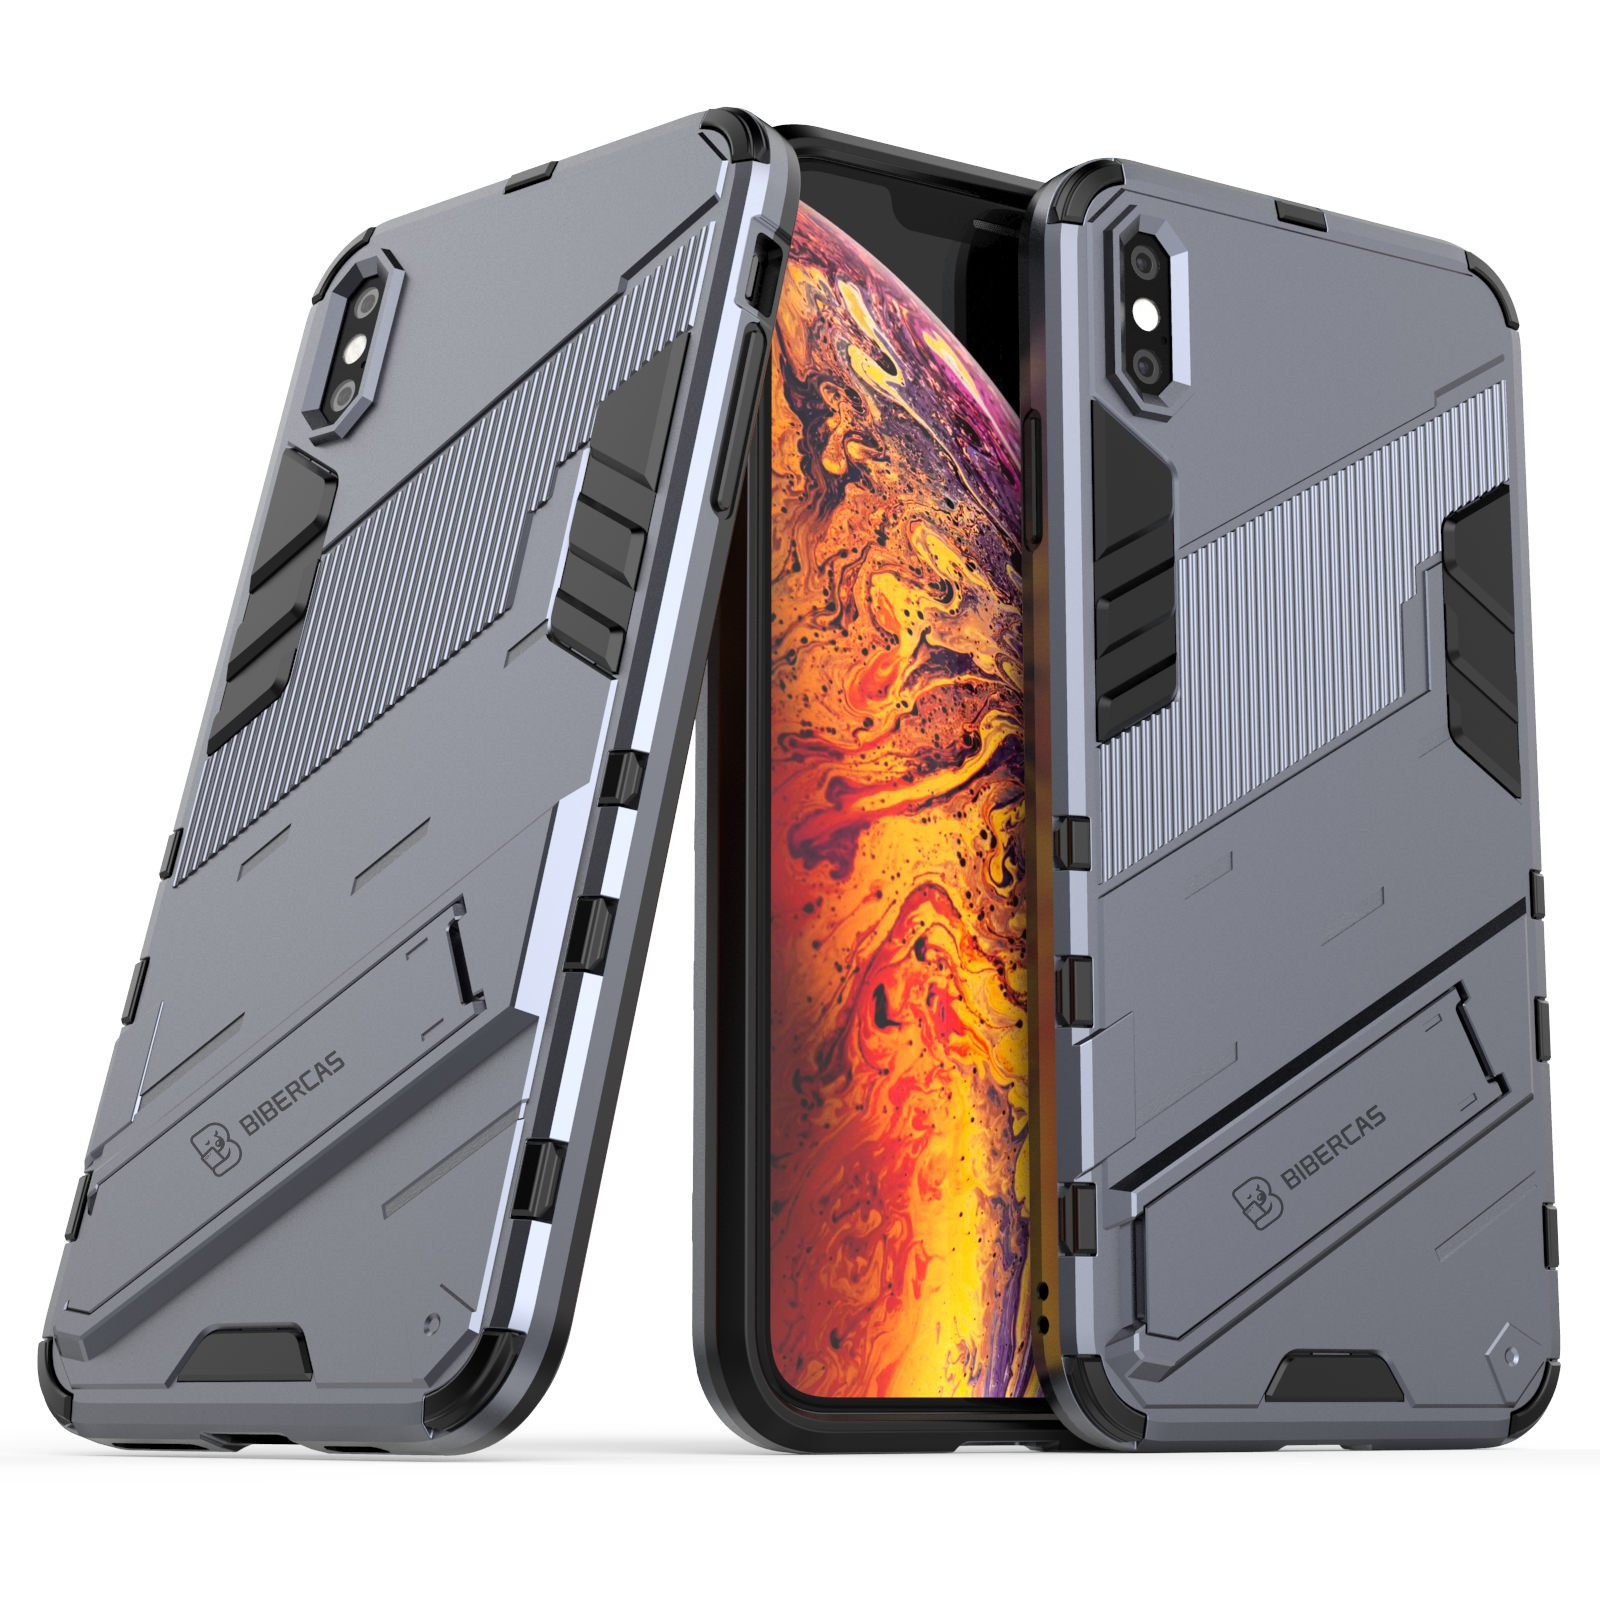 Apple Iphone XS Max Phone Case Iphone XR XS X Casing Punk Kickstand Back Armor Hard Cover